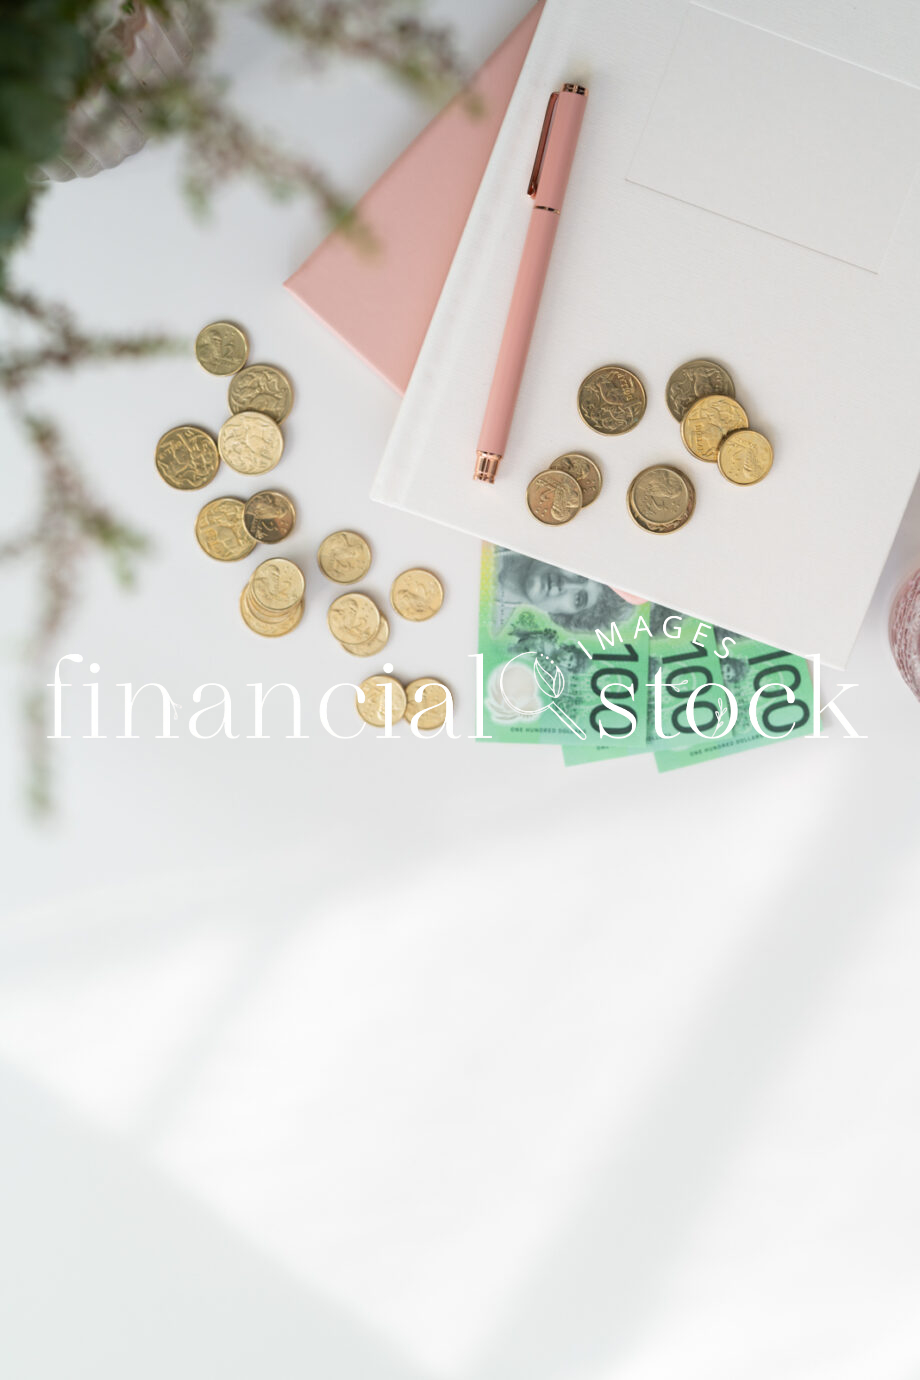 Australian, Australia, Pink, Feminine, Financial, Finance, Money, Coins, Notes, 100, Hundred, Dollar, Copyspace, Stock, Photo, Image, Images, Picture, Content, Creation